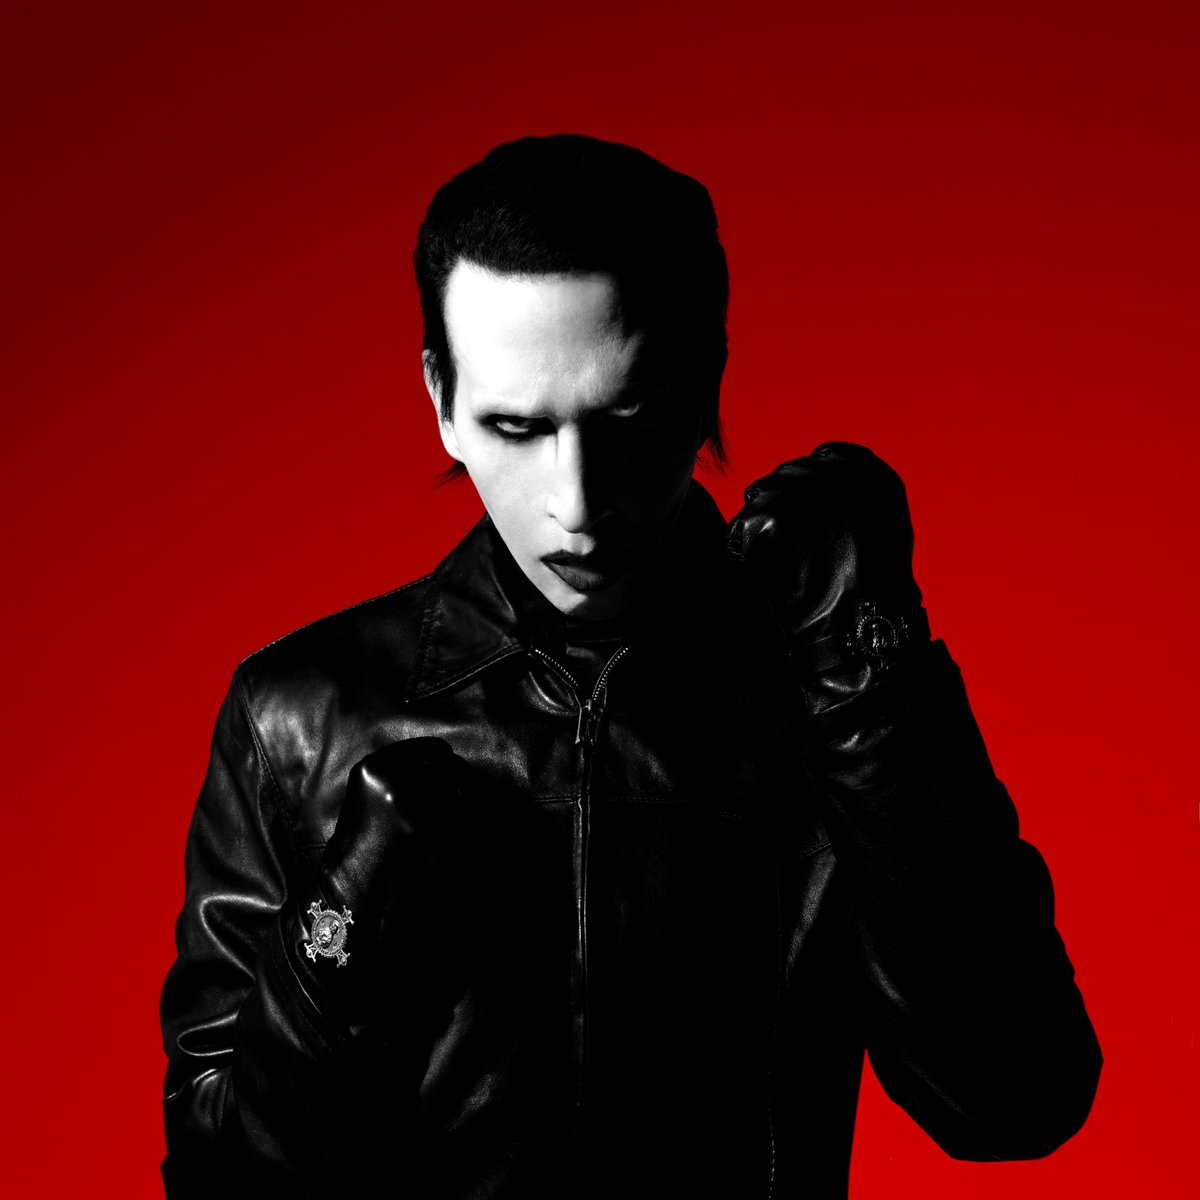 JUST ANNOUNCED: Marilyn Manson With Special Guest Slaughter To Prevail at The Fillmore Silver Spring on Saturday, August 3 - Get tickets Friday @ 10am. livemu.sc/3xONCMQ